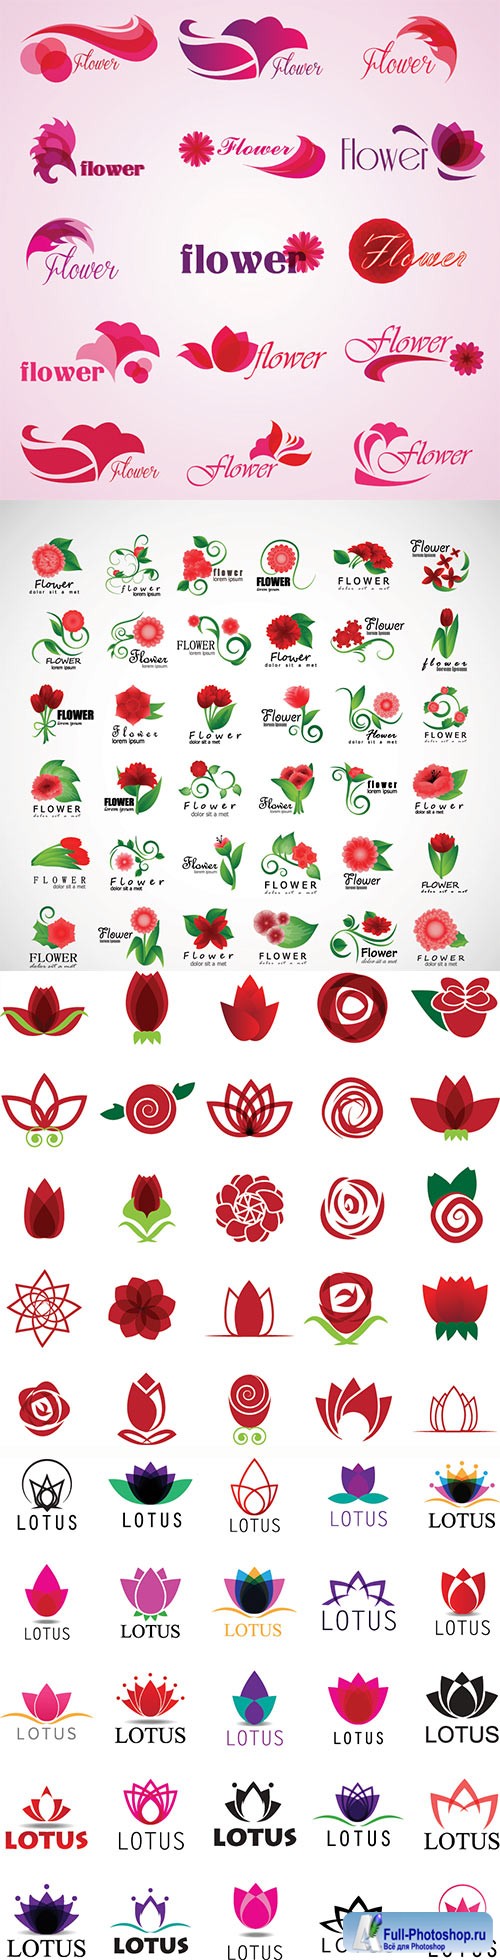 Flower icons vector set